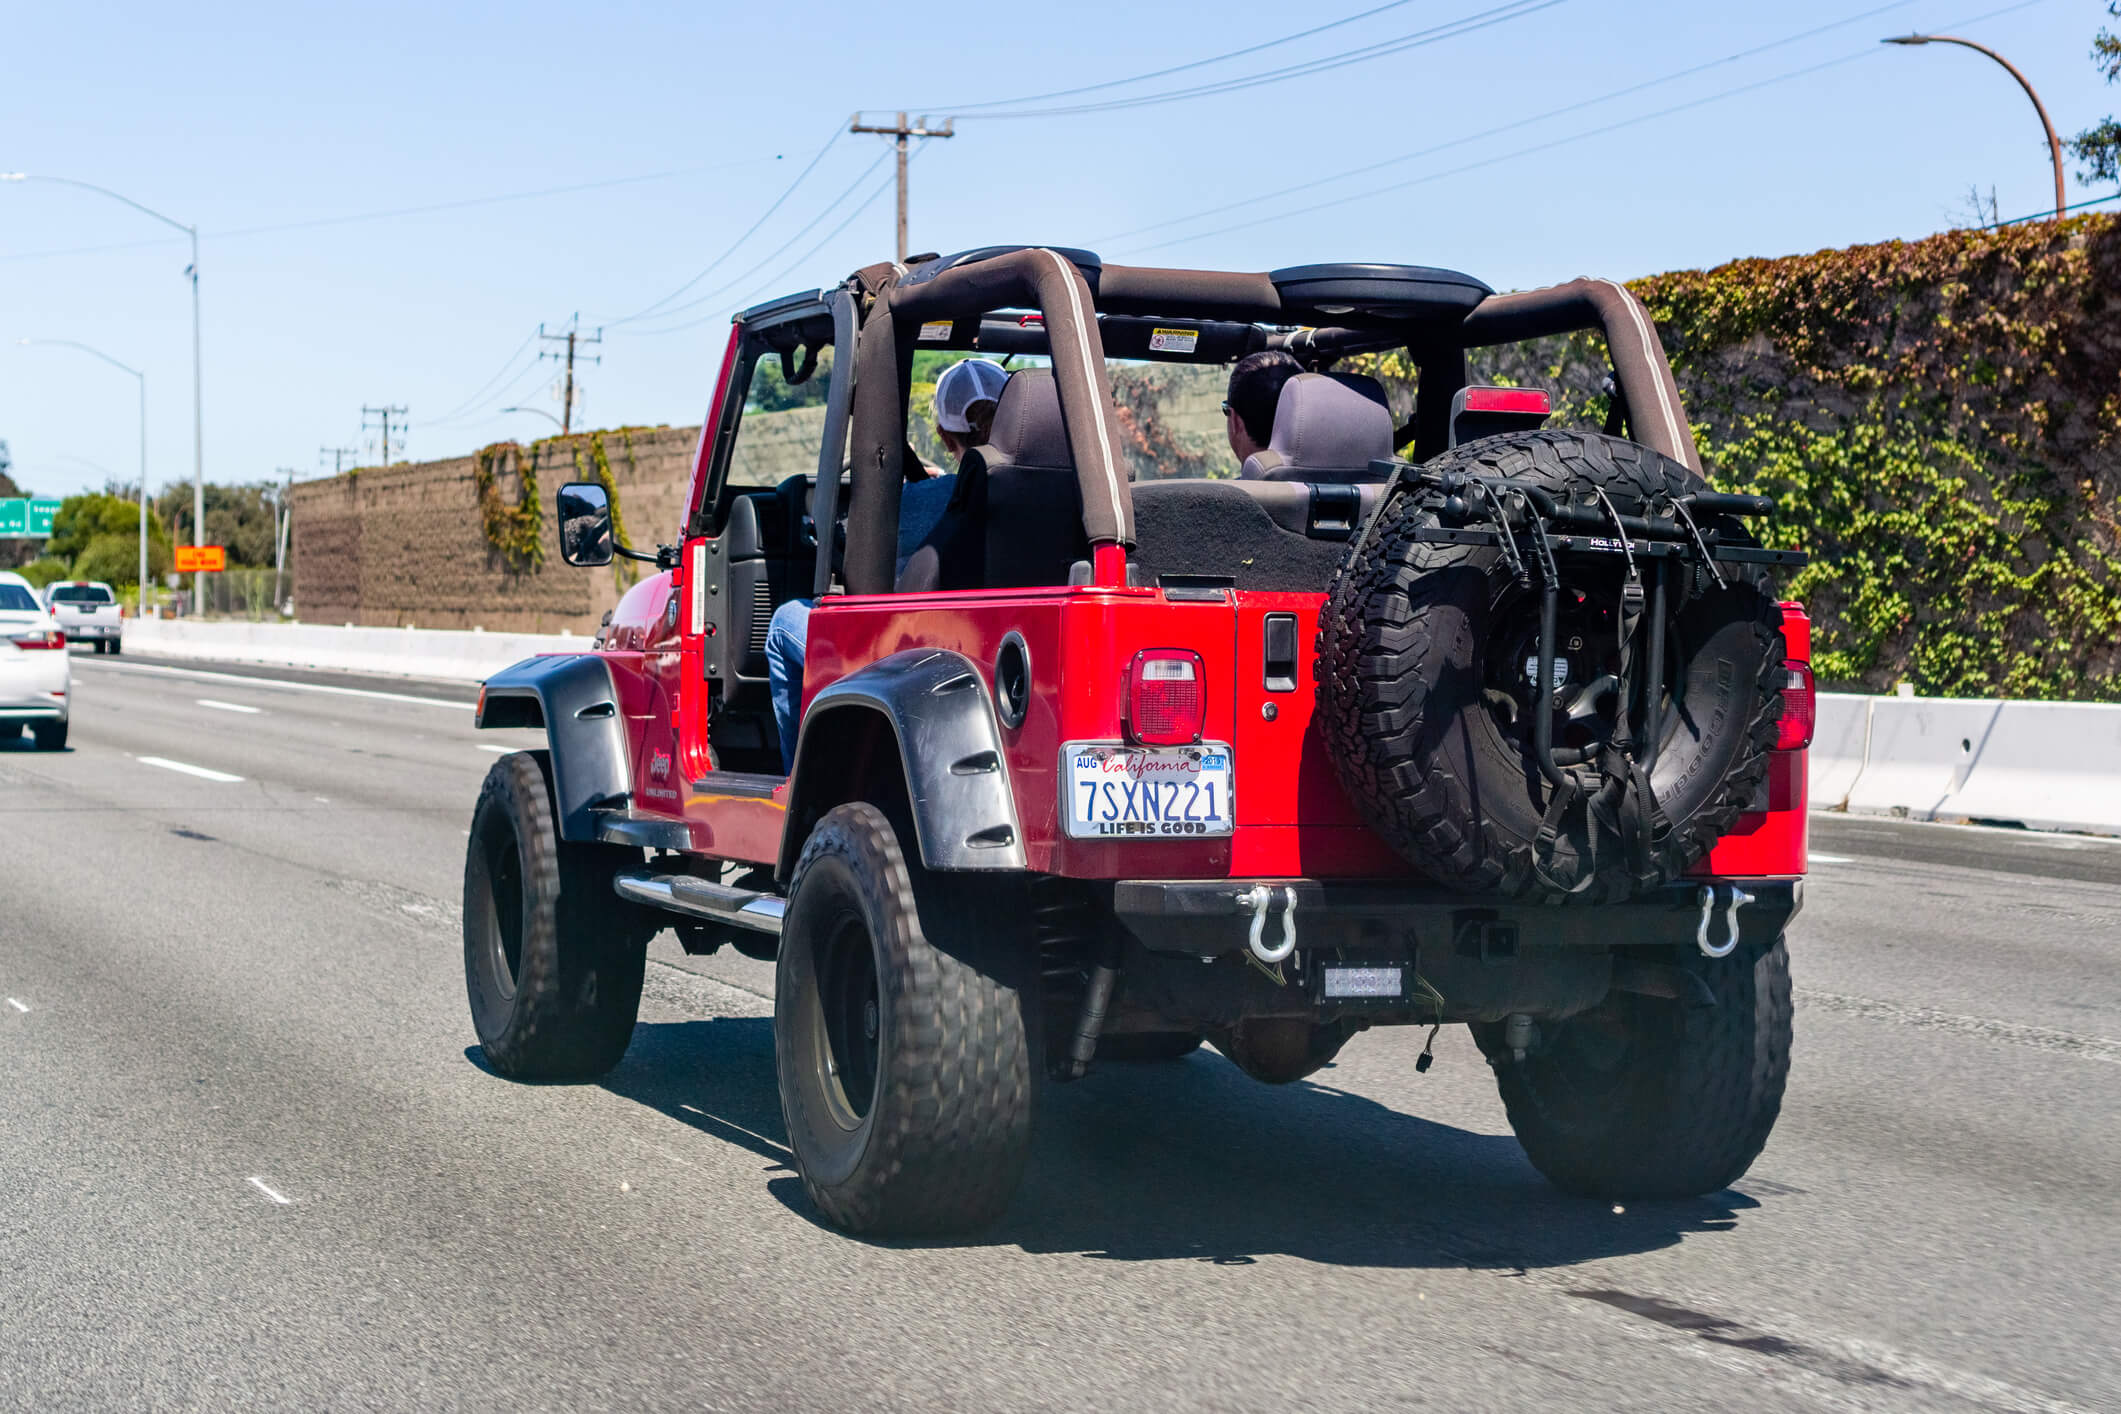 Jeep Wrangler that could have a death wobble defect.